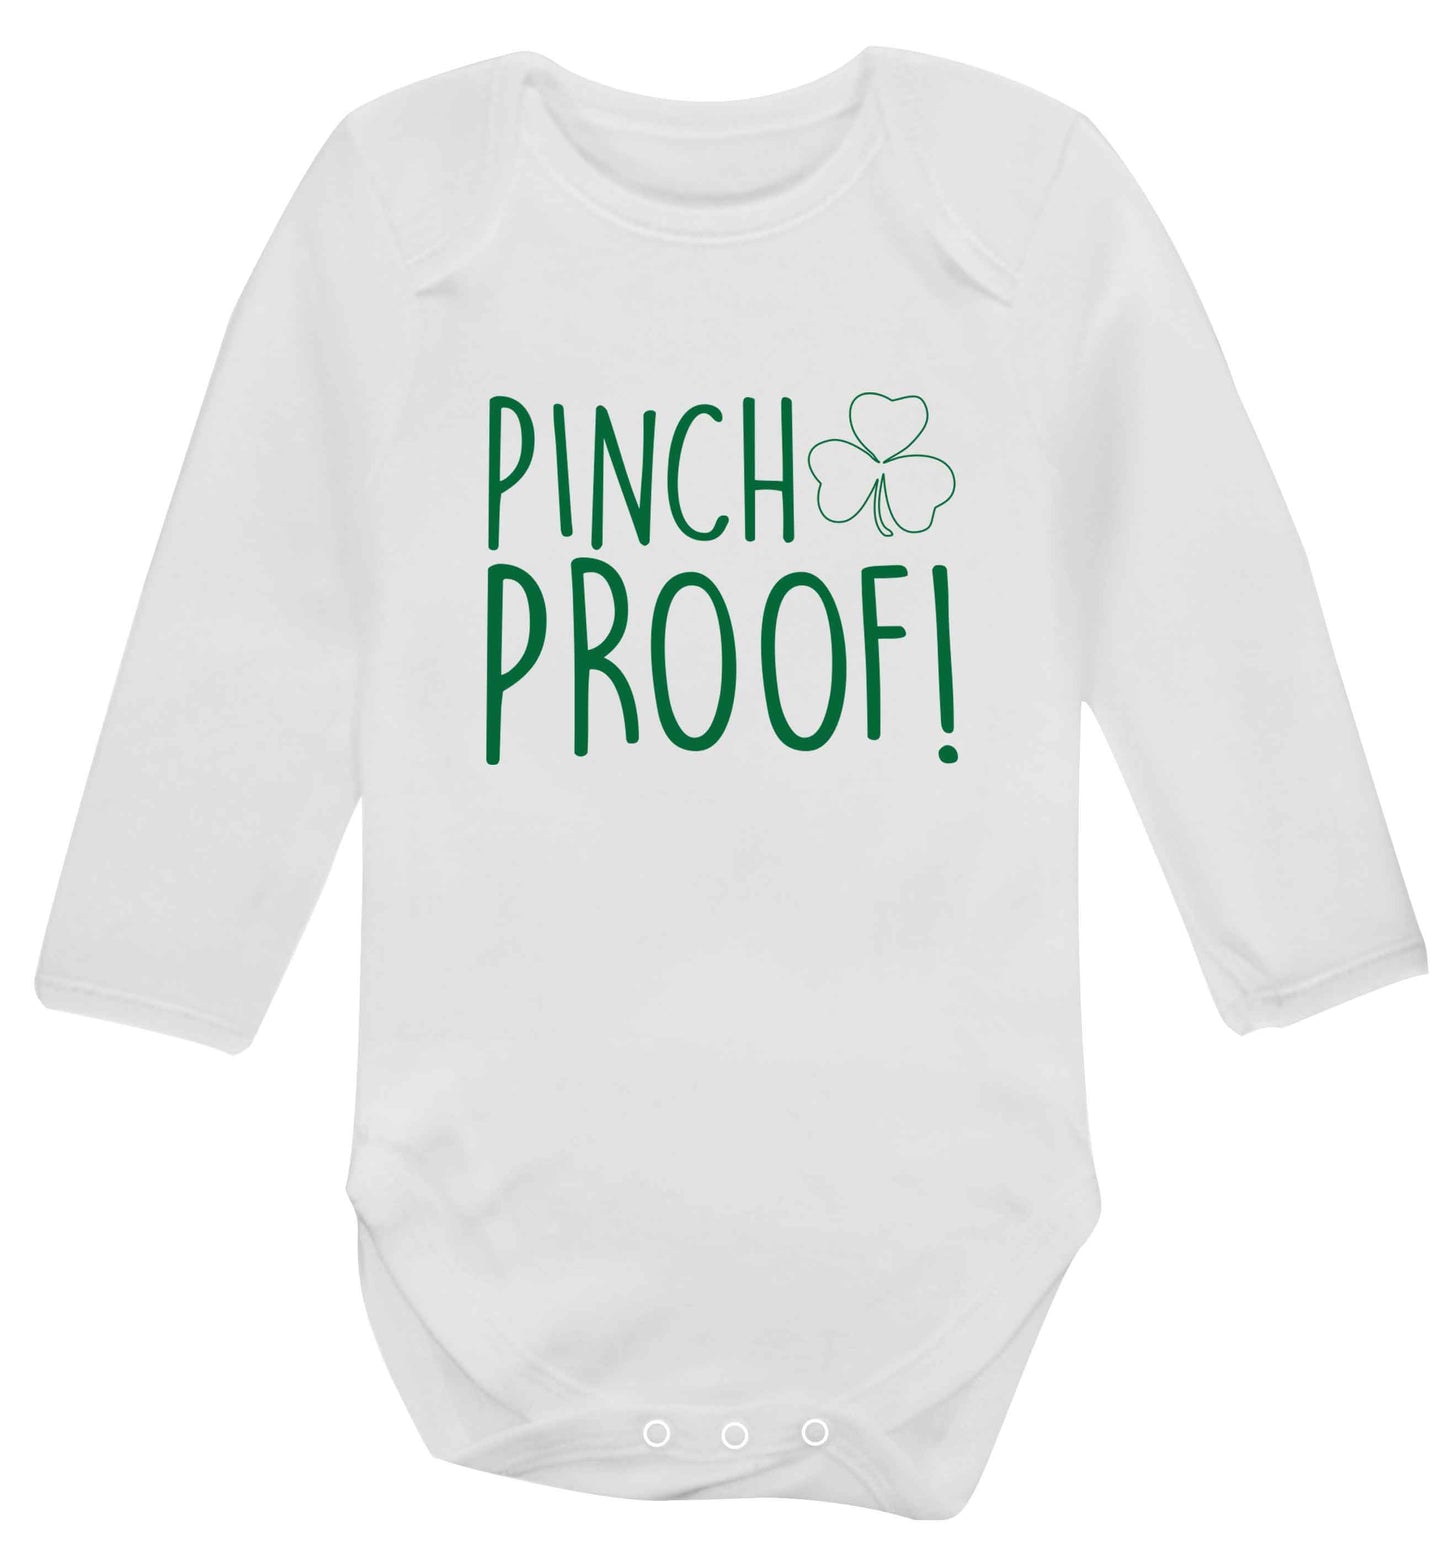 Pinch Proof baby vest long sleeved white 6-12 months